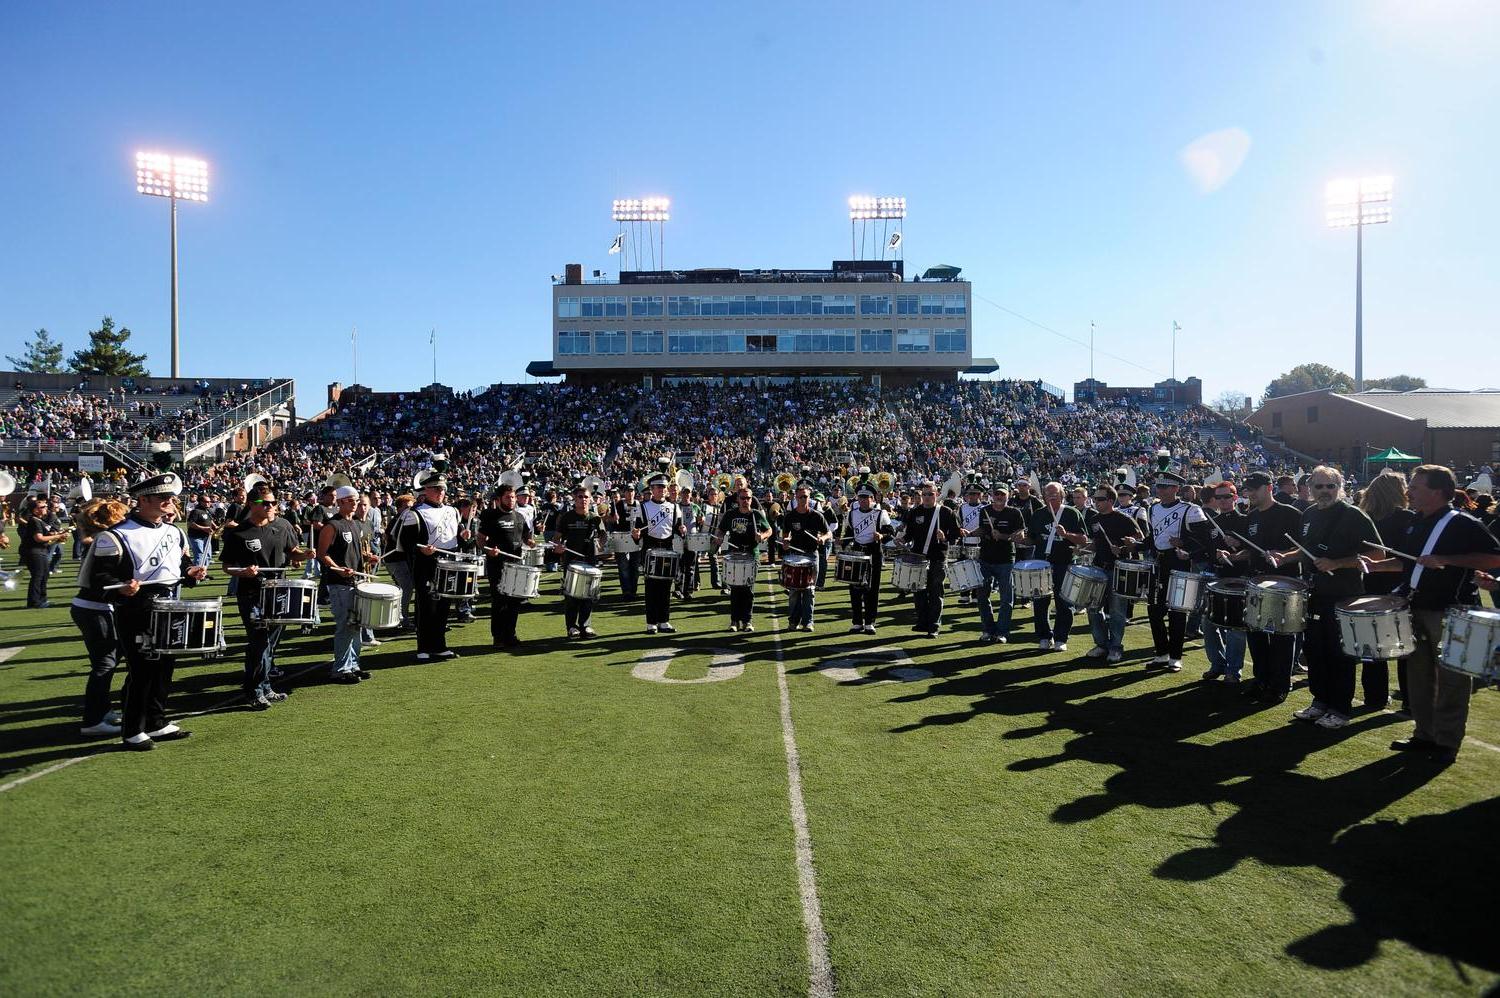 Marching 110 alumni play their instruments on the field